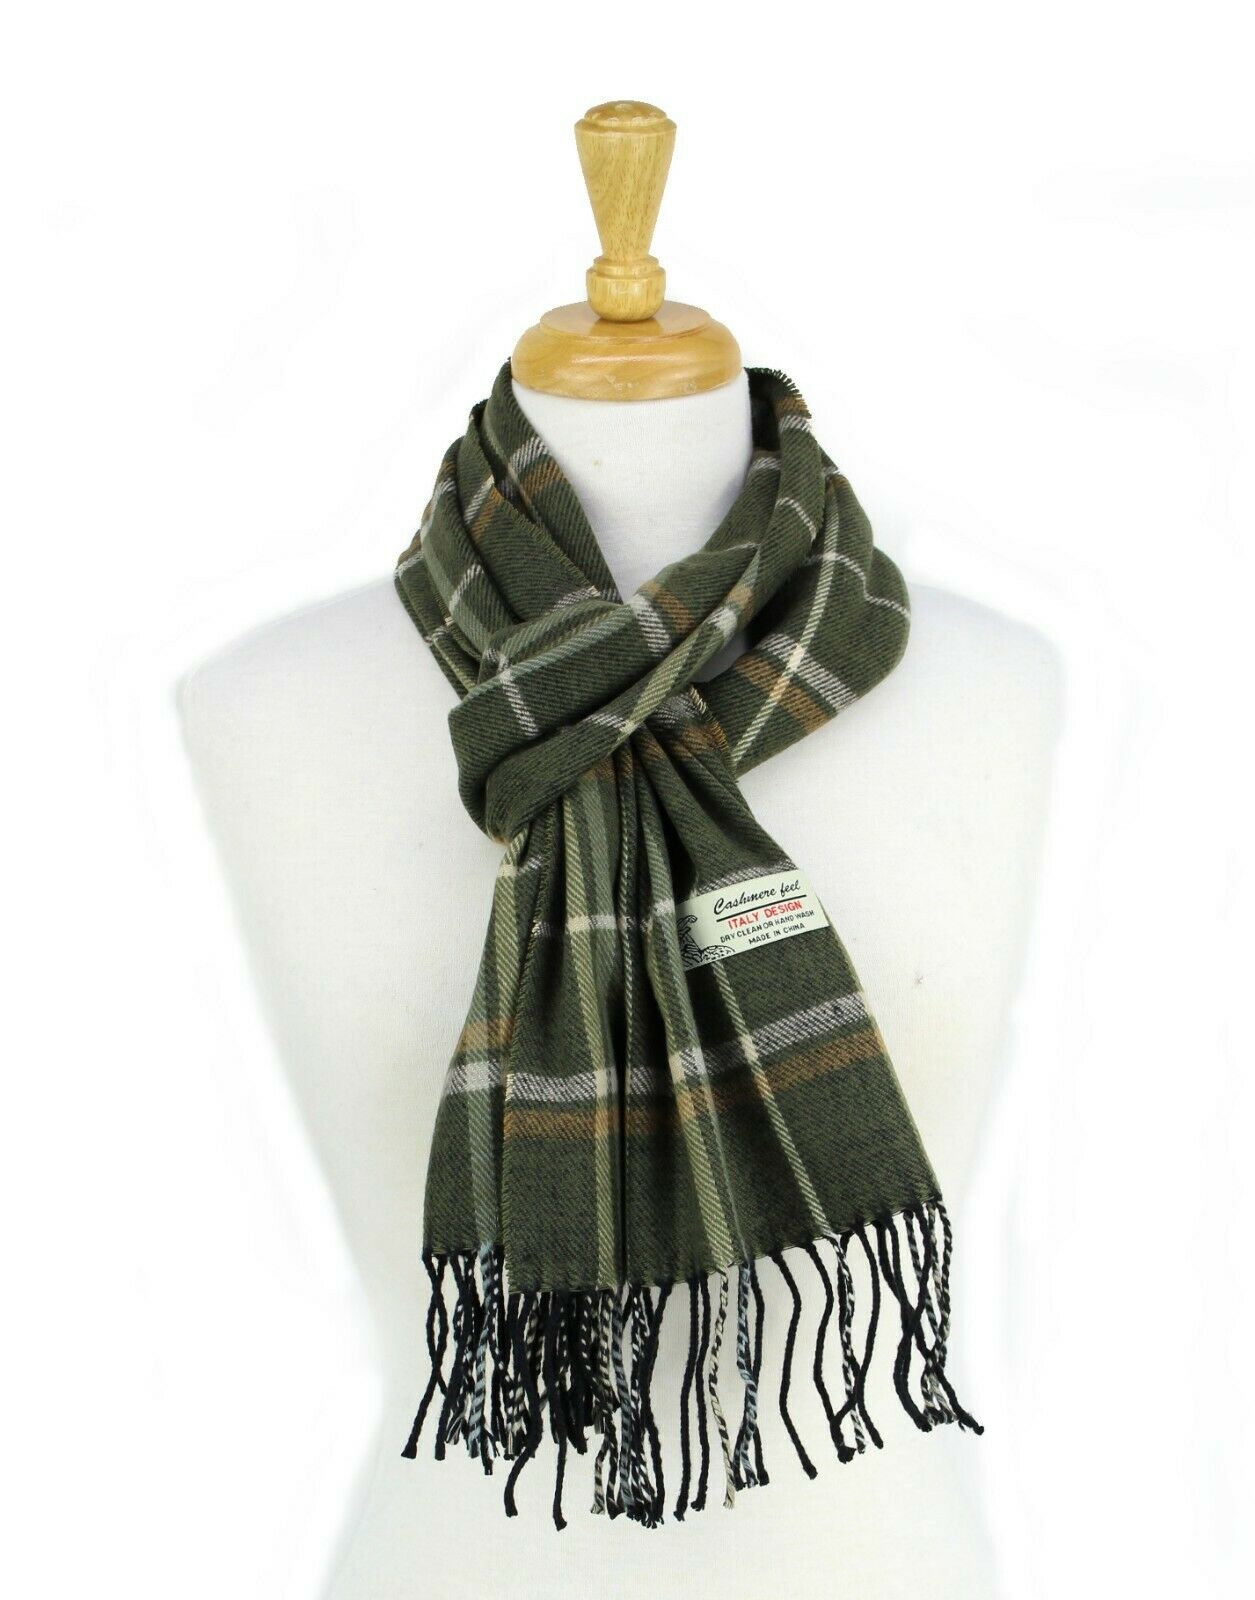 Super Soft Luxurious Classic Cashmere Feel Winter Scarf - image 1 of 2